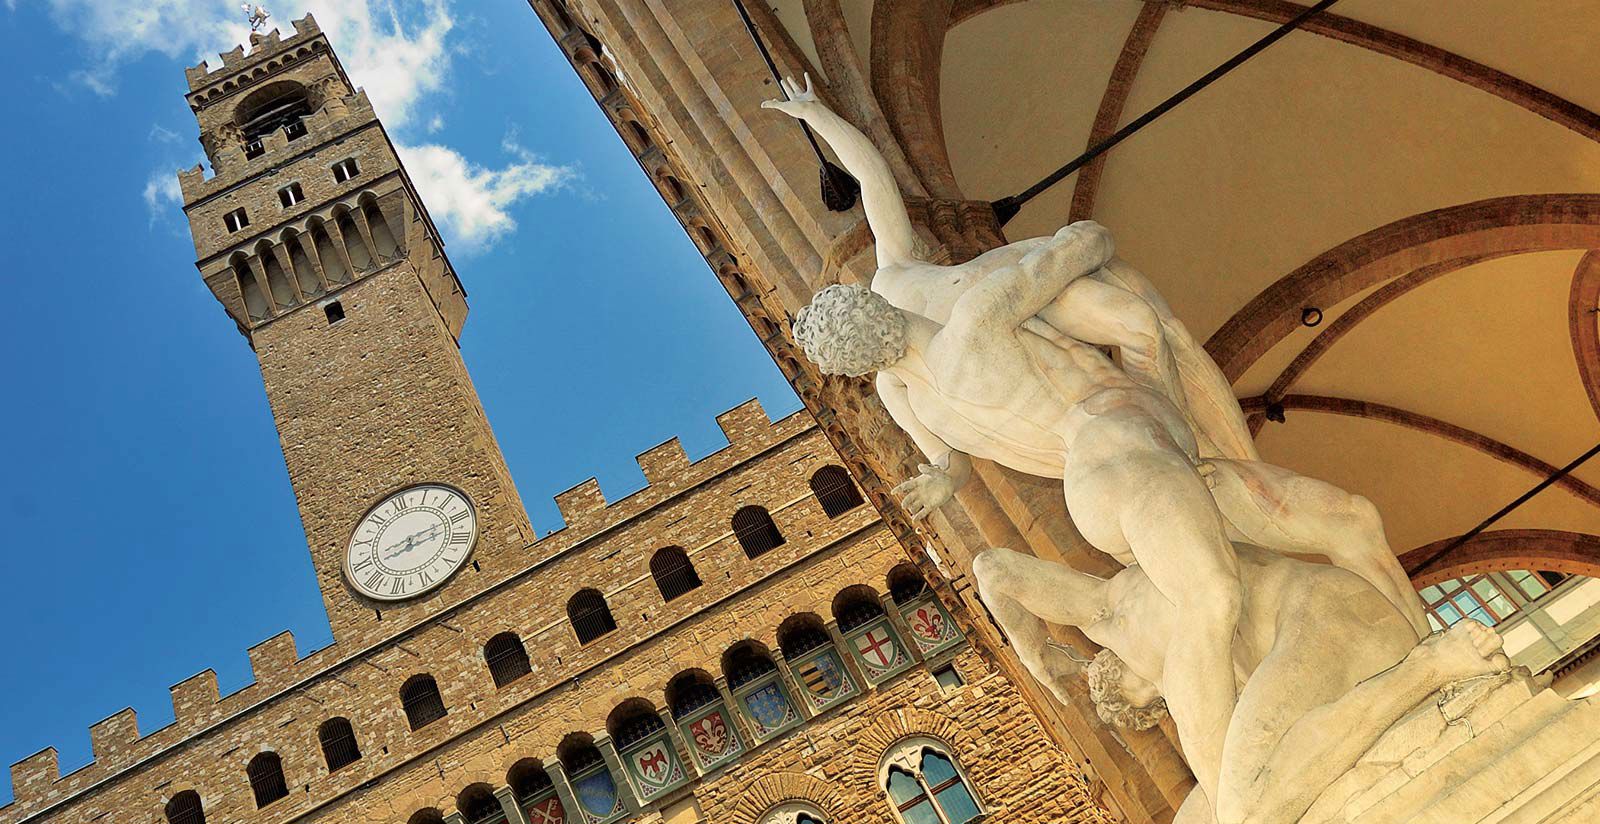 Hotel River & Spa Firenze - Current Exhibitions in Florence 5